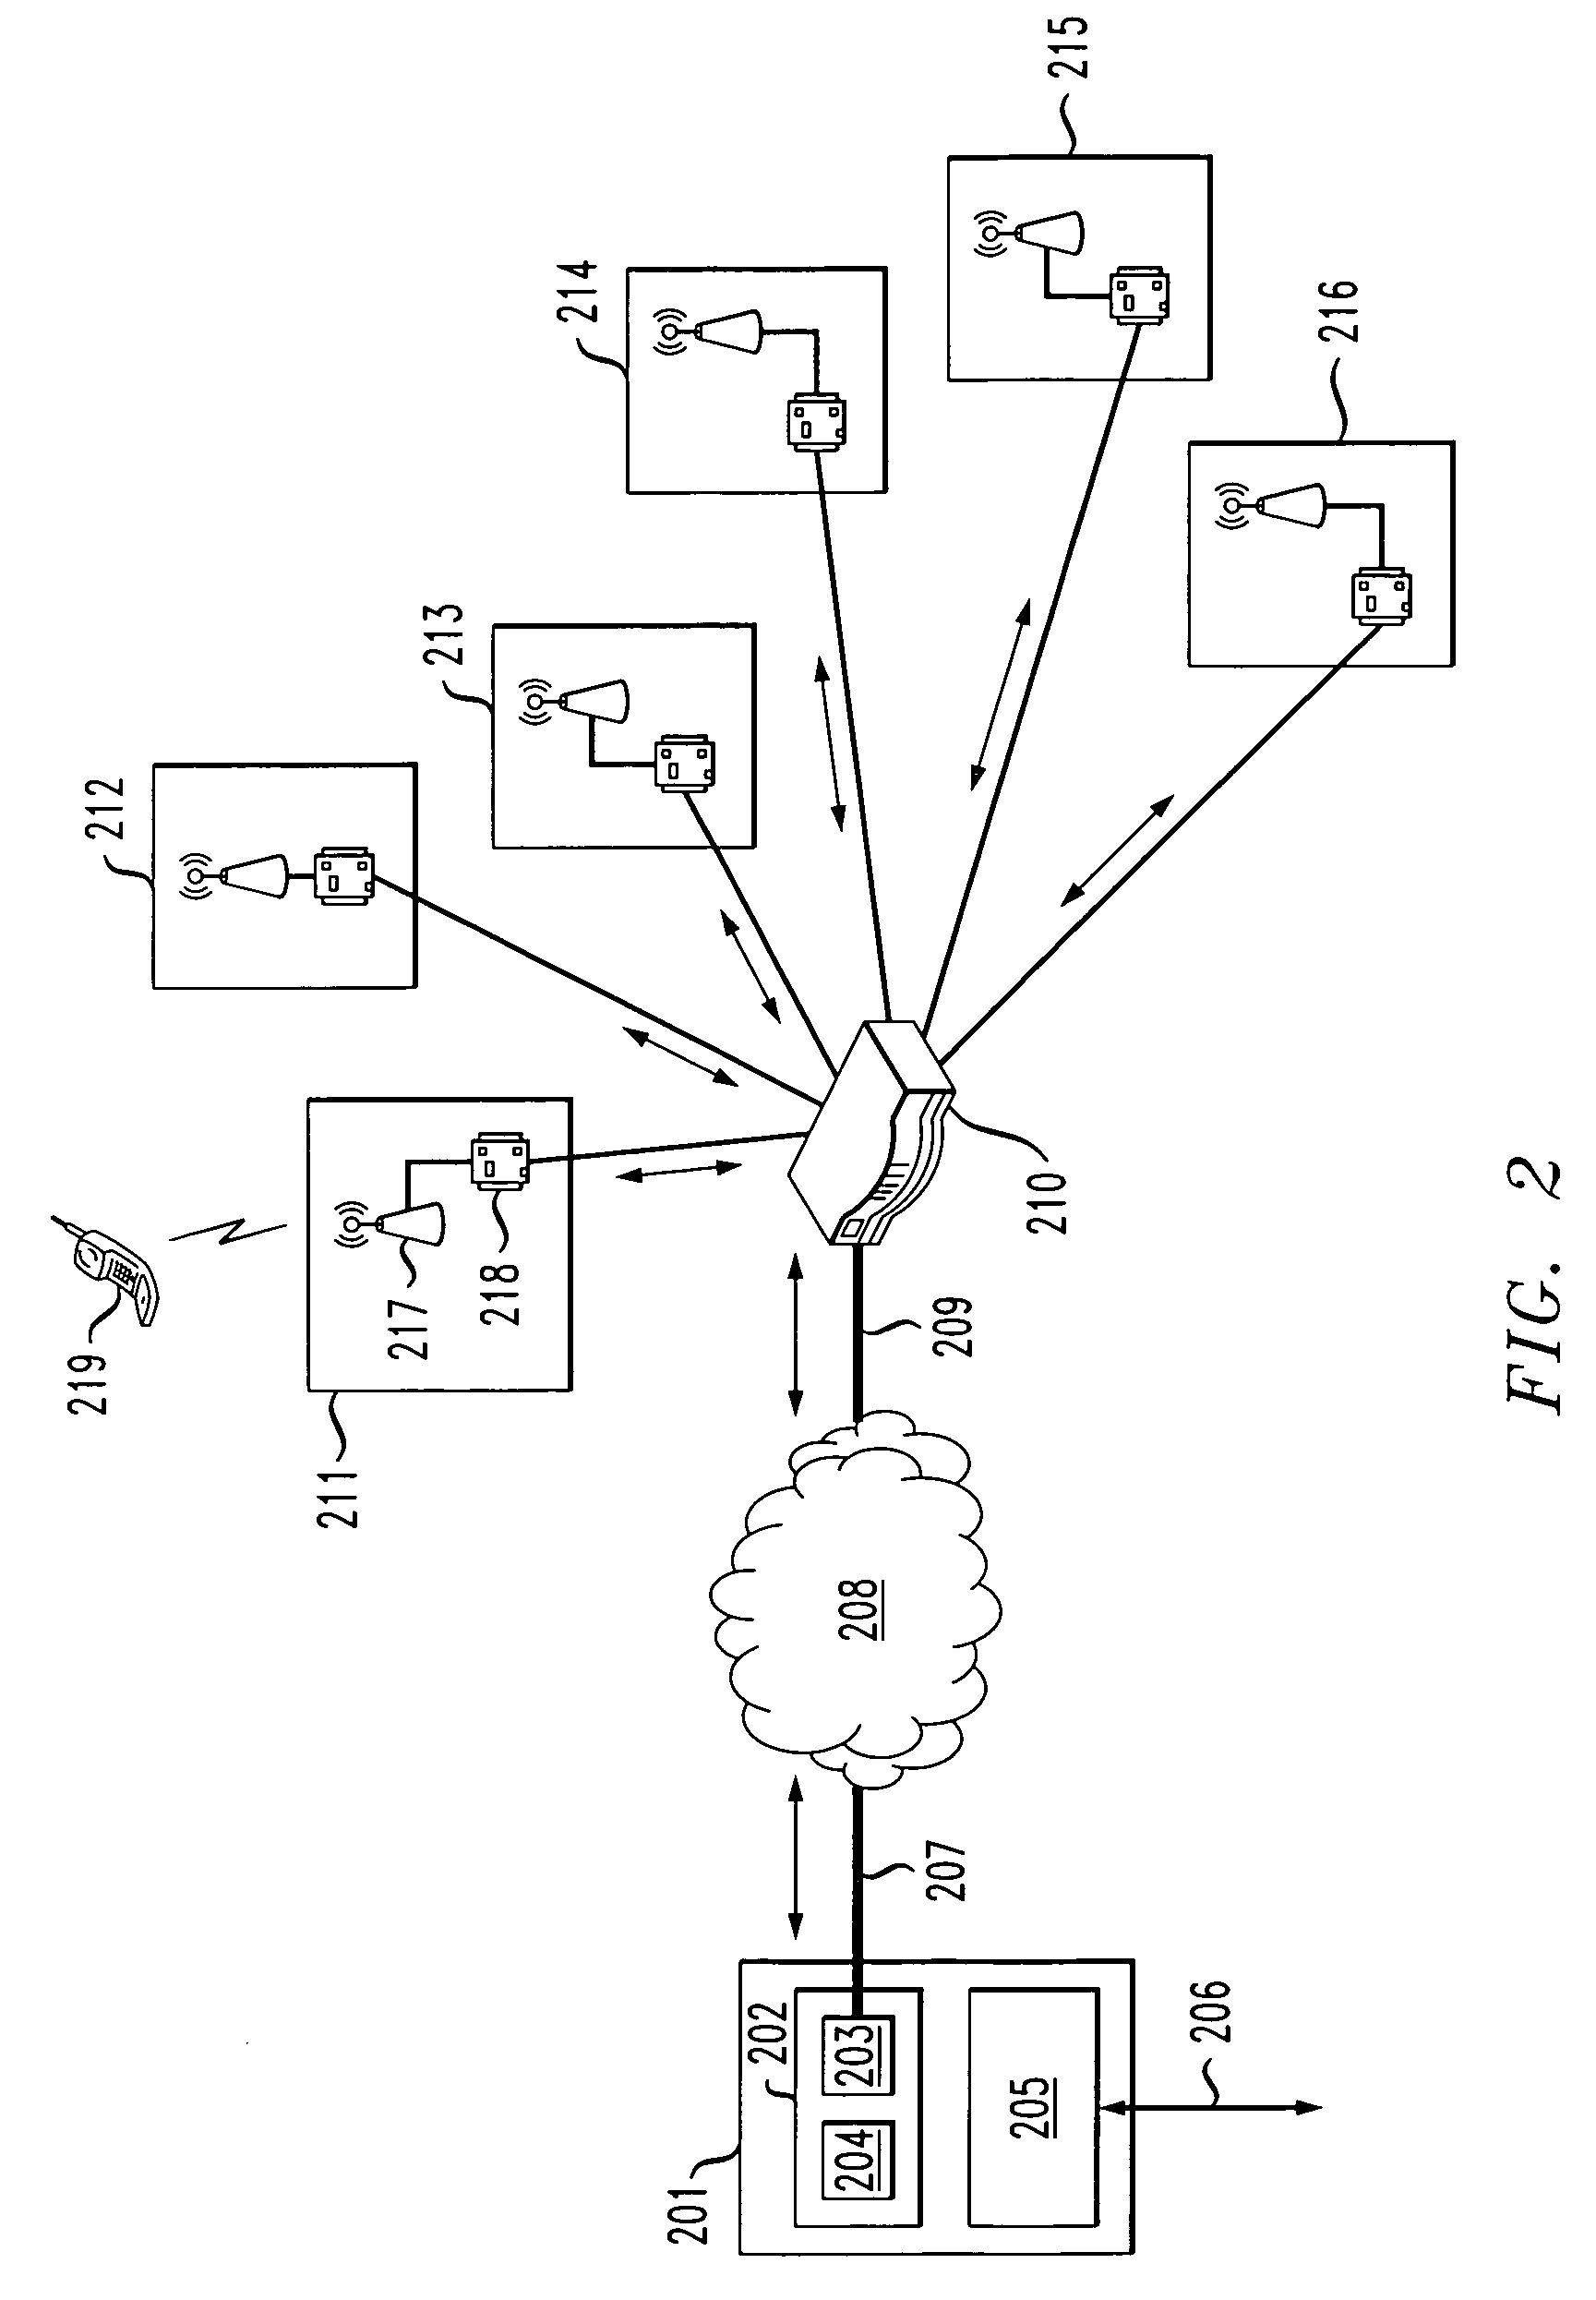 Method and apparatus for cellular communication over data networks